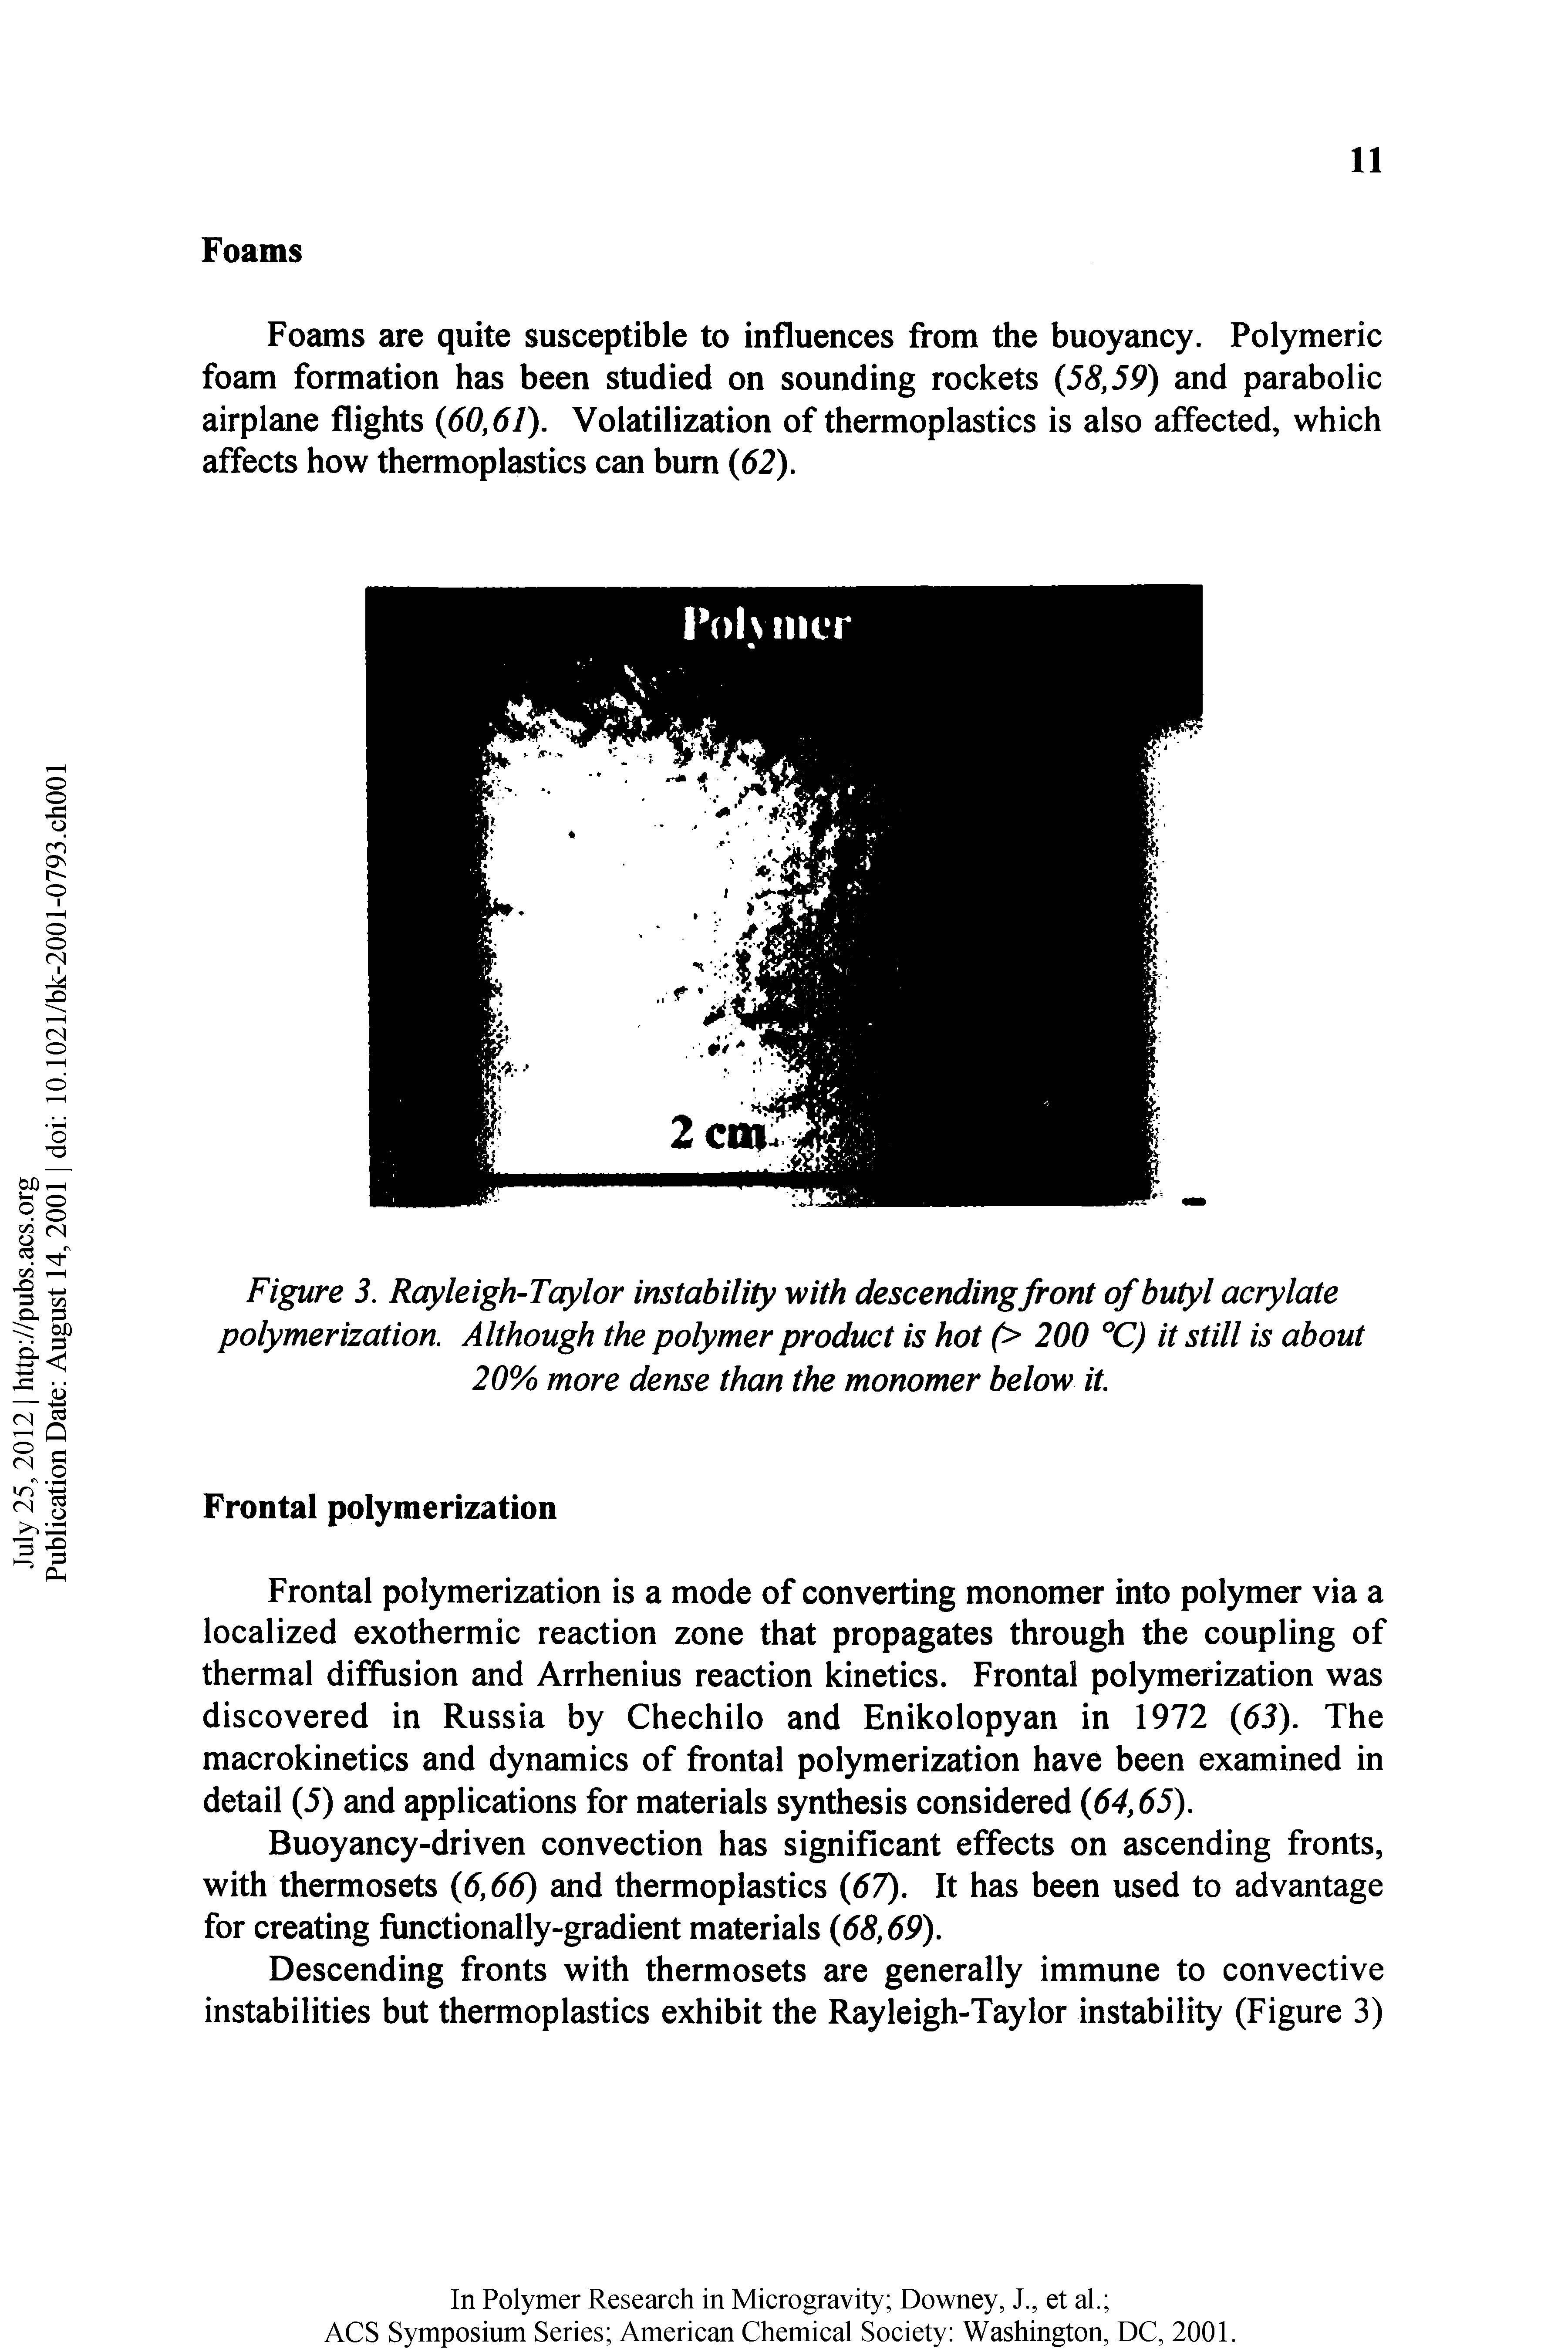 Figure 3. Rayleigh-Taylor instability with descending front of butyl acrylate polymerization. Although the polymer product is hot (> 200 °C) it still is about 20% more dense than the monomer below it.